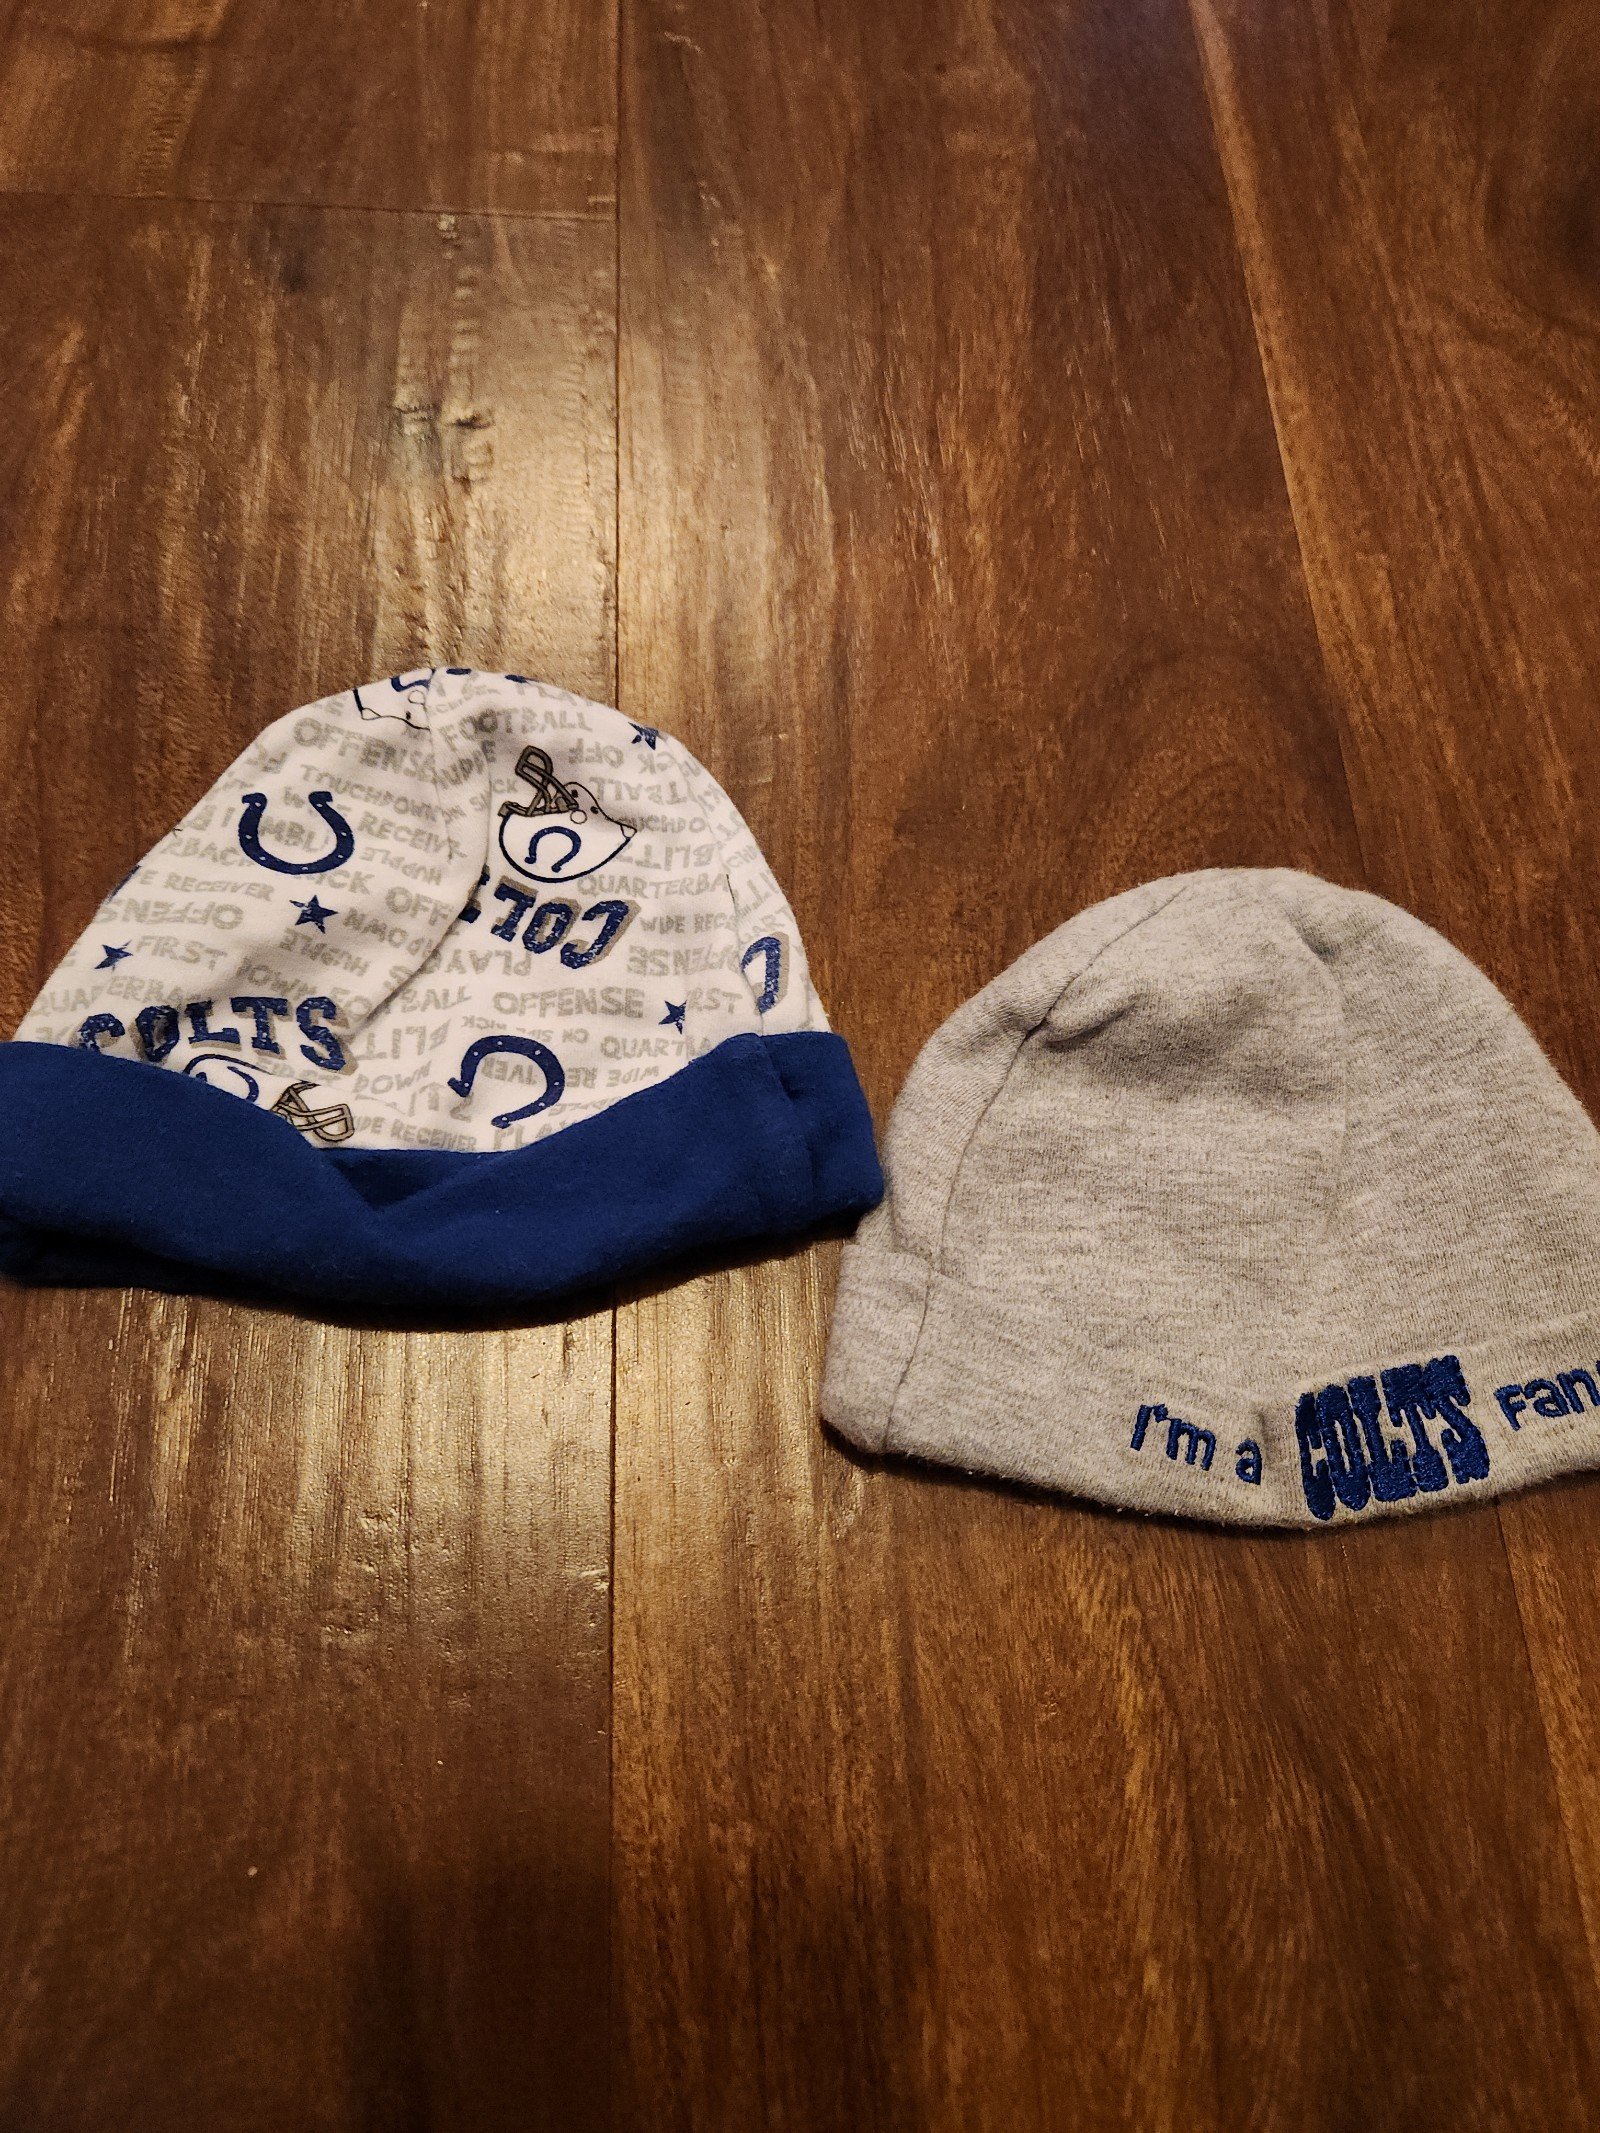 Colts baby hats 9CwvdD87f